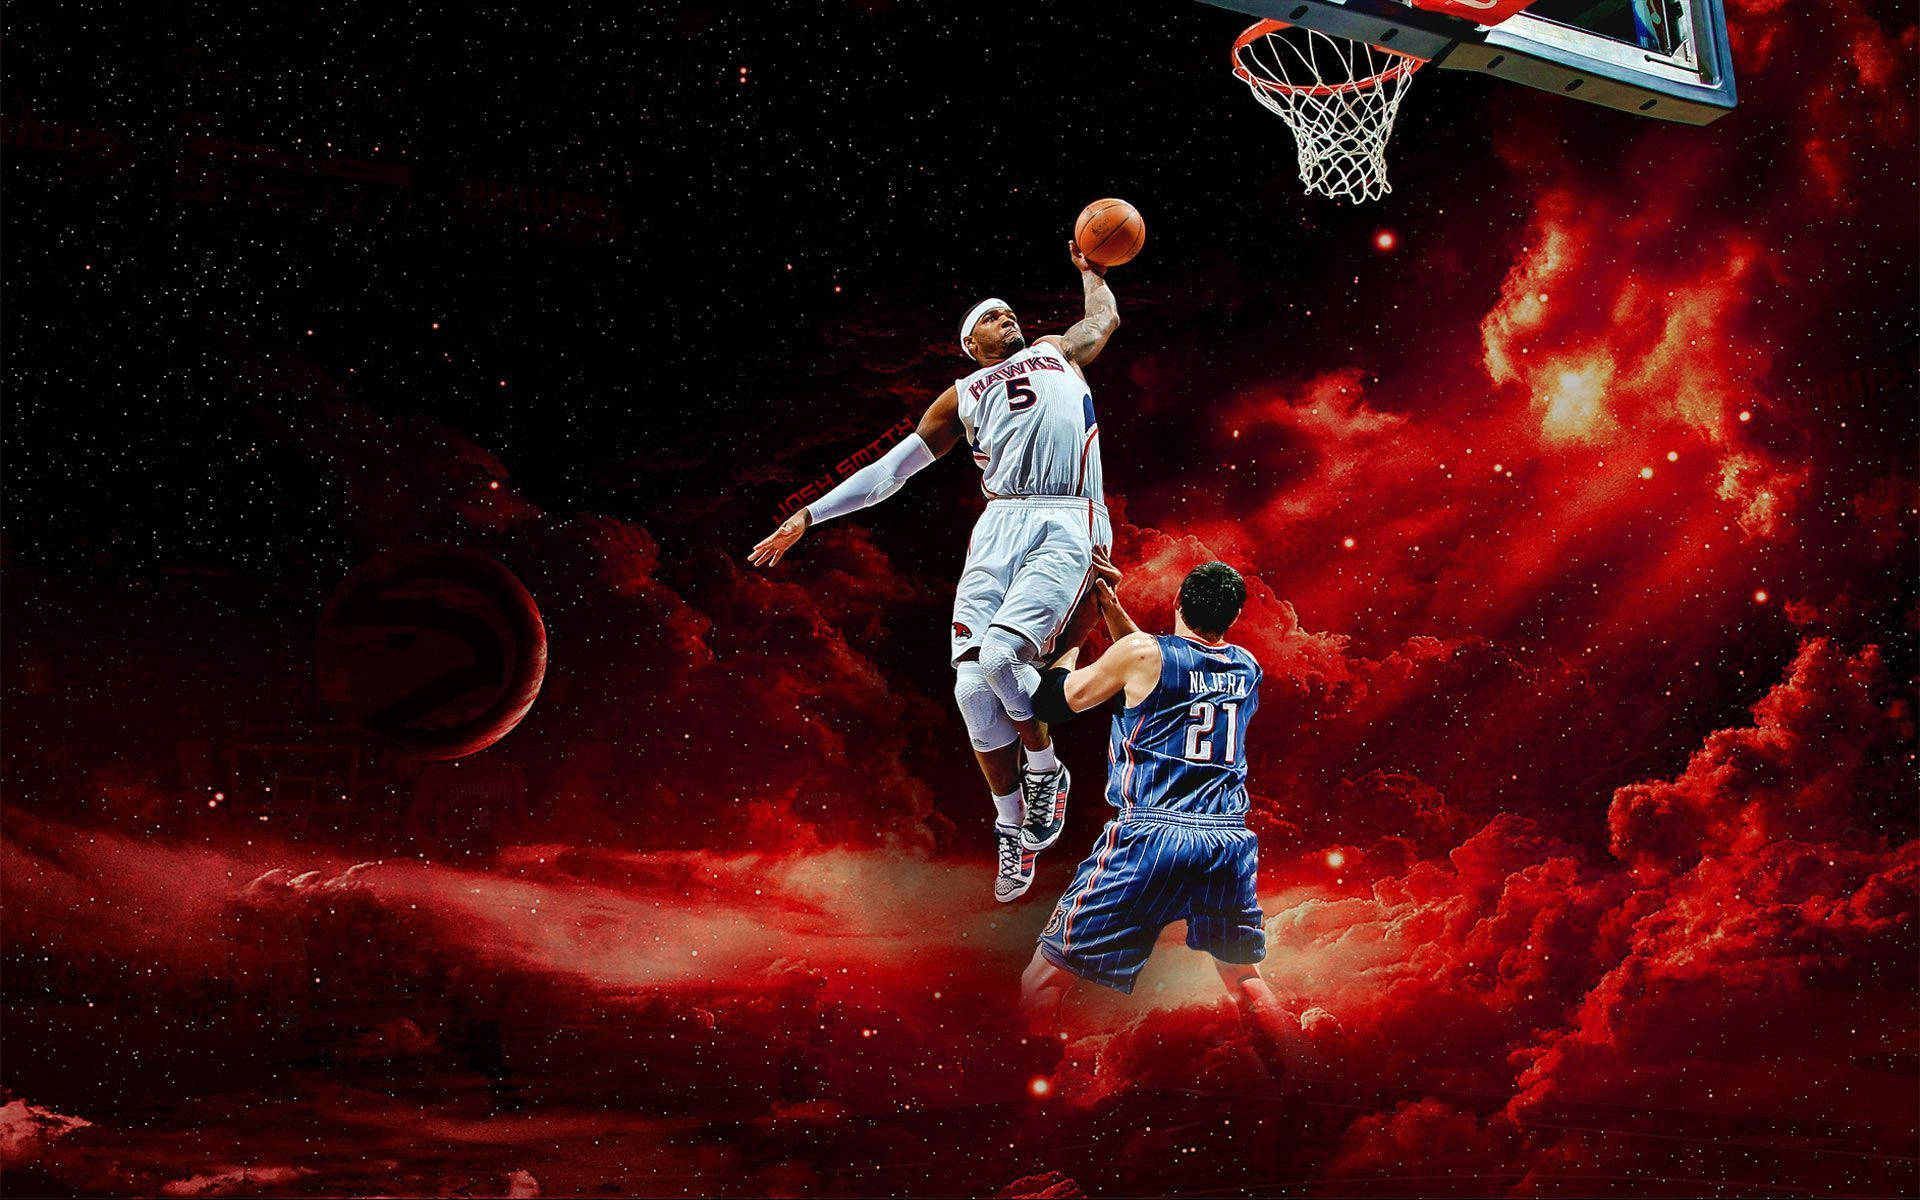 Cool Nba Space Poster Background